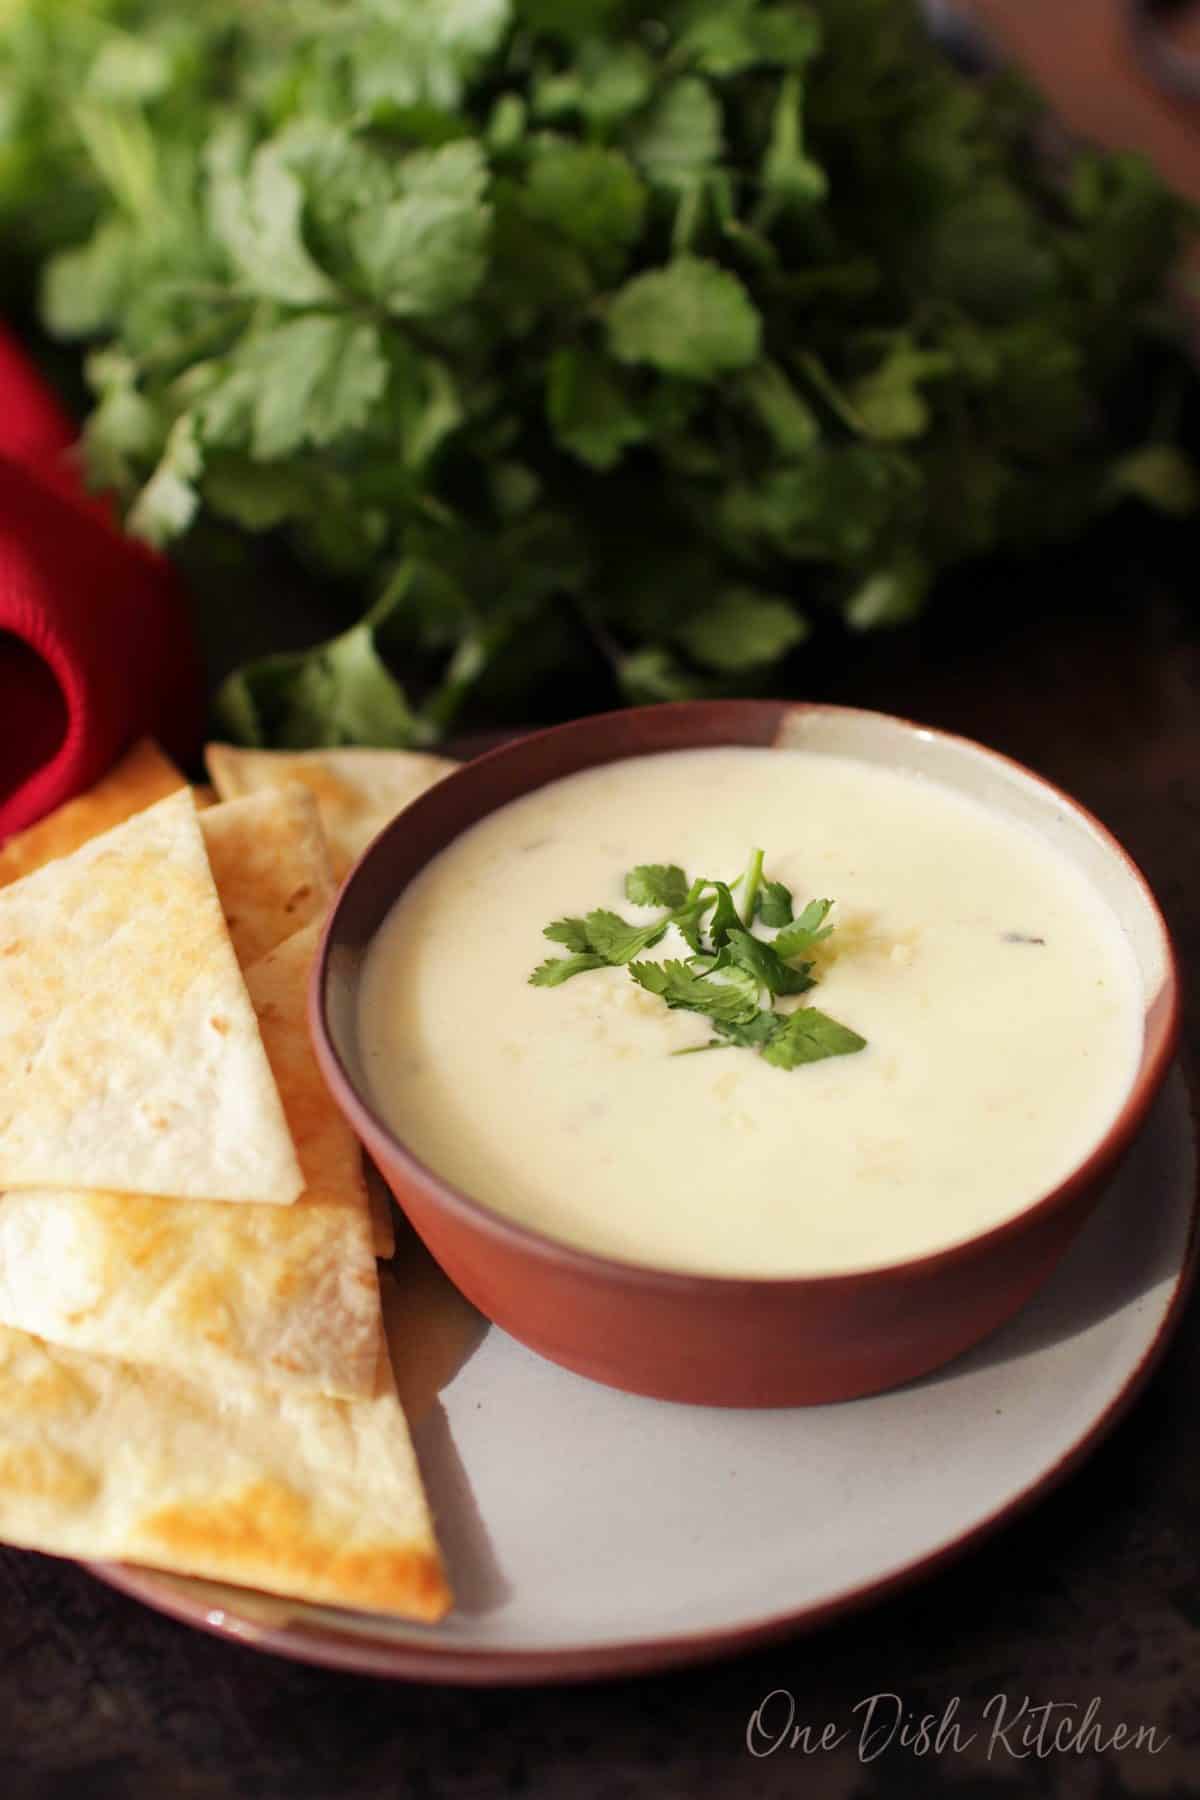 A small bowl of white queso on a plate with homemade tortilla chips.